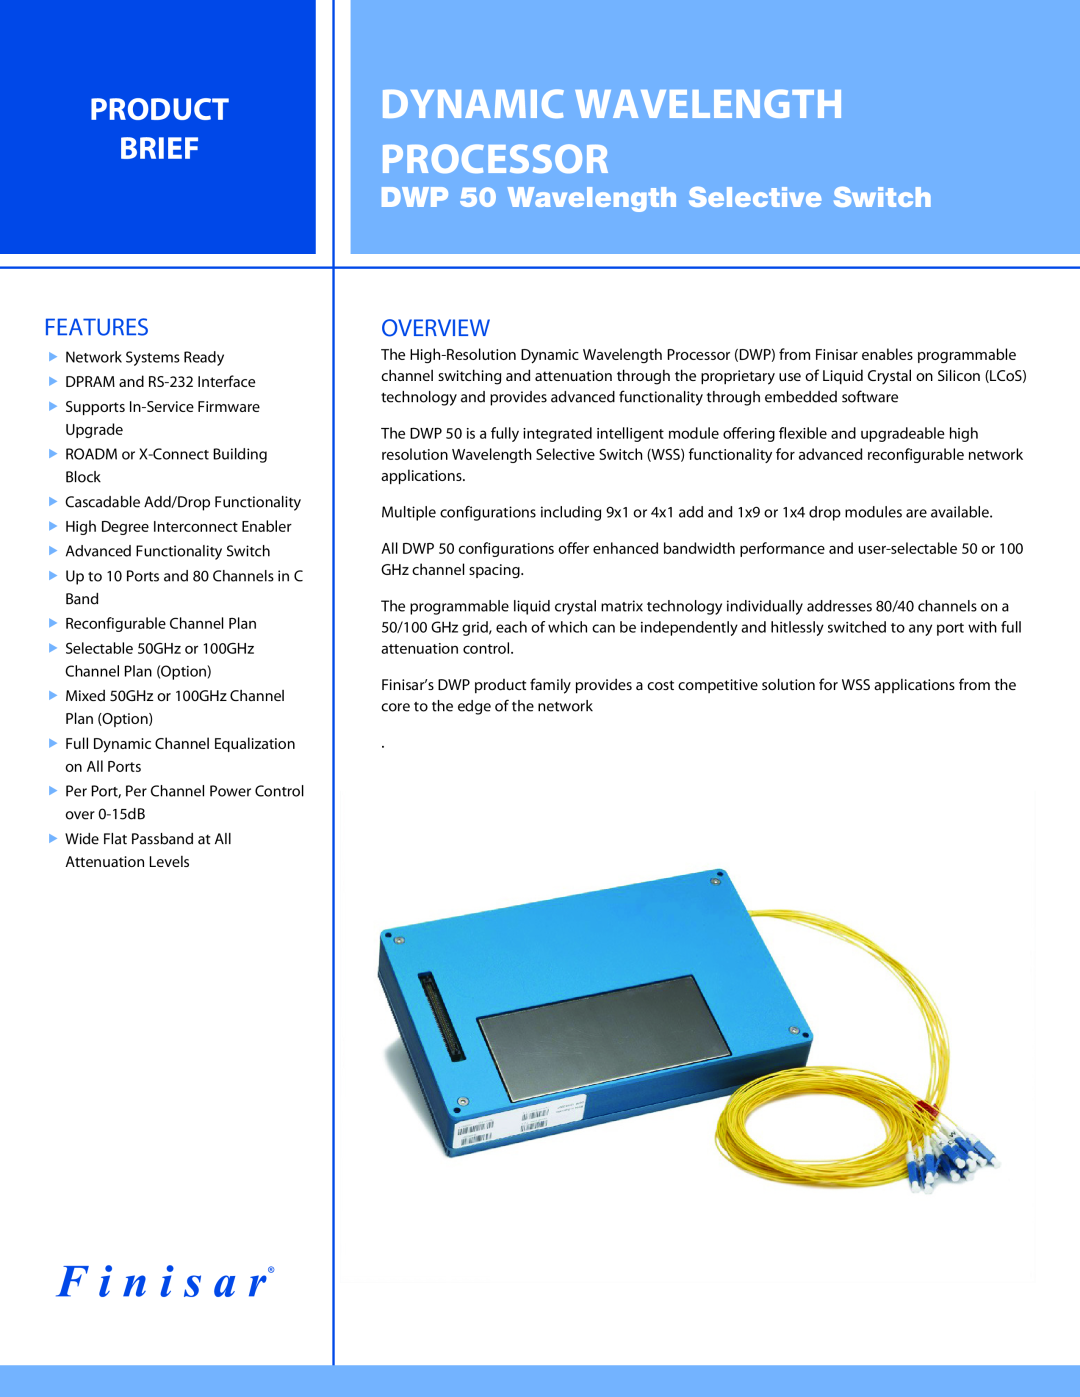 Finisar manual Brief, Dynamic Wavelength, Processor, Product , DWP 50 Wavelength Selective Switch, Features, Overview 